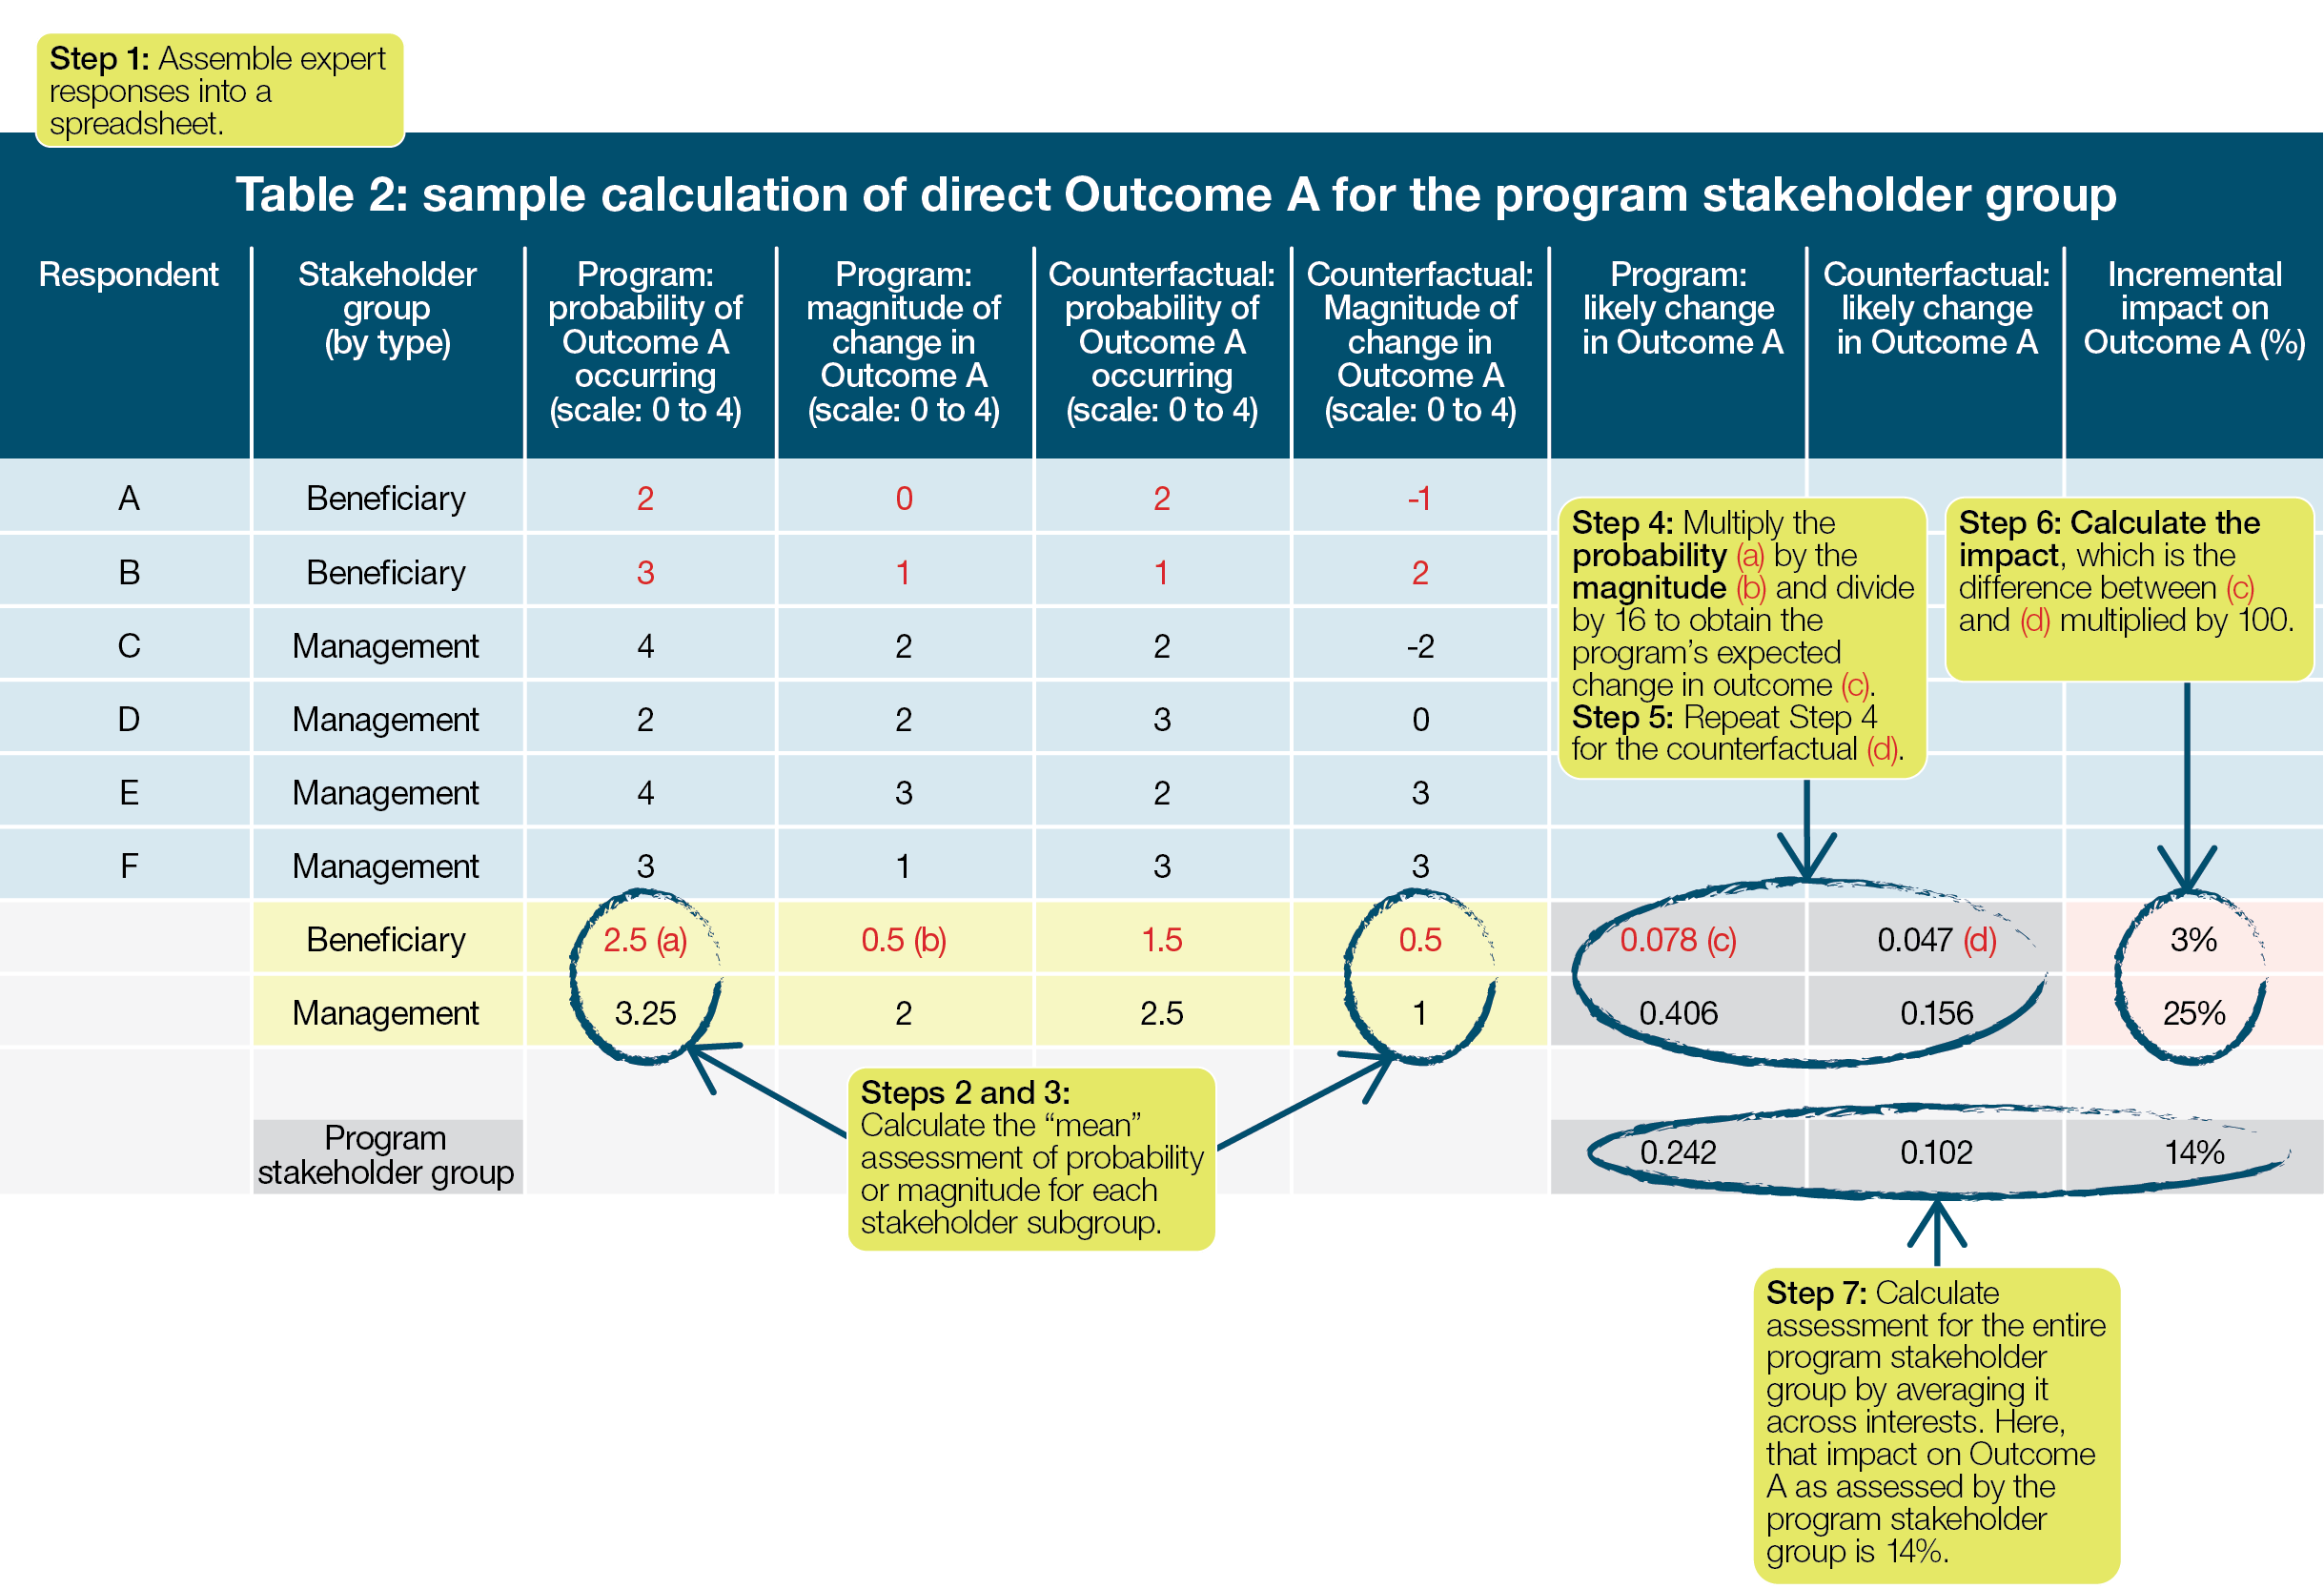 Sample calculation of direct Outcome A for the program stakeholder group. Details in text following the image: